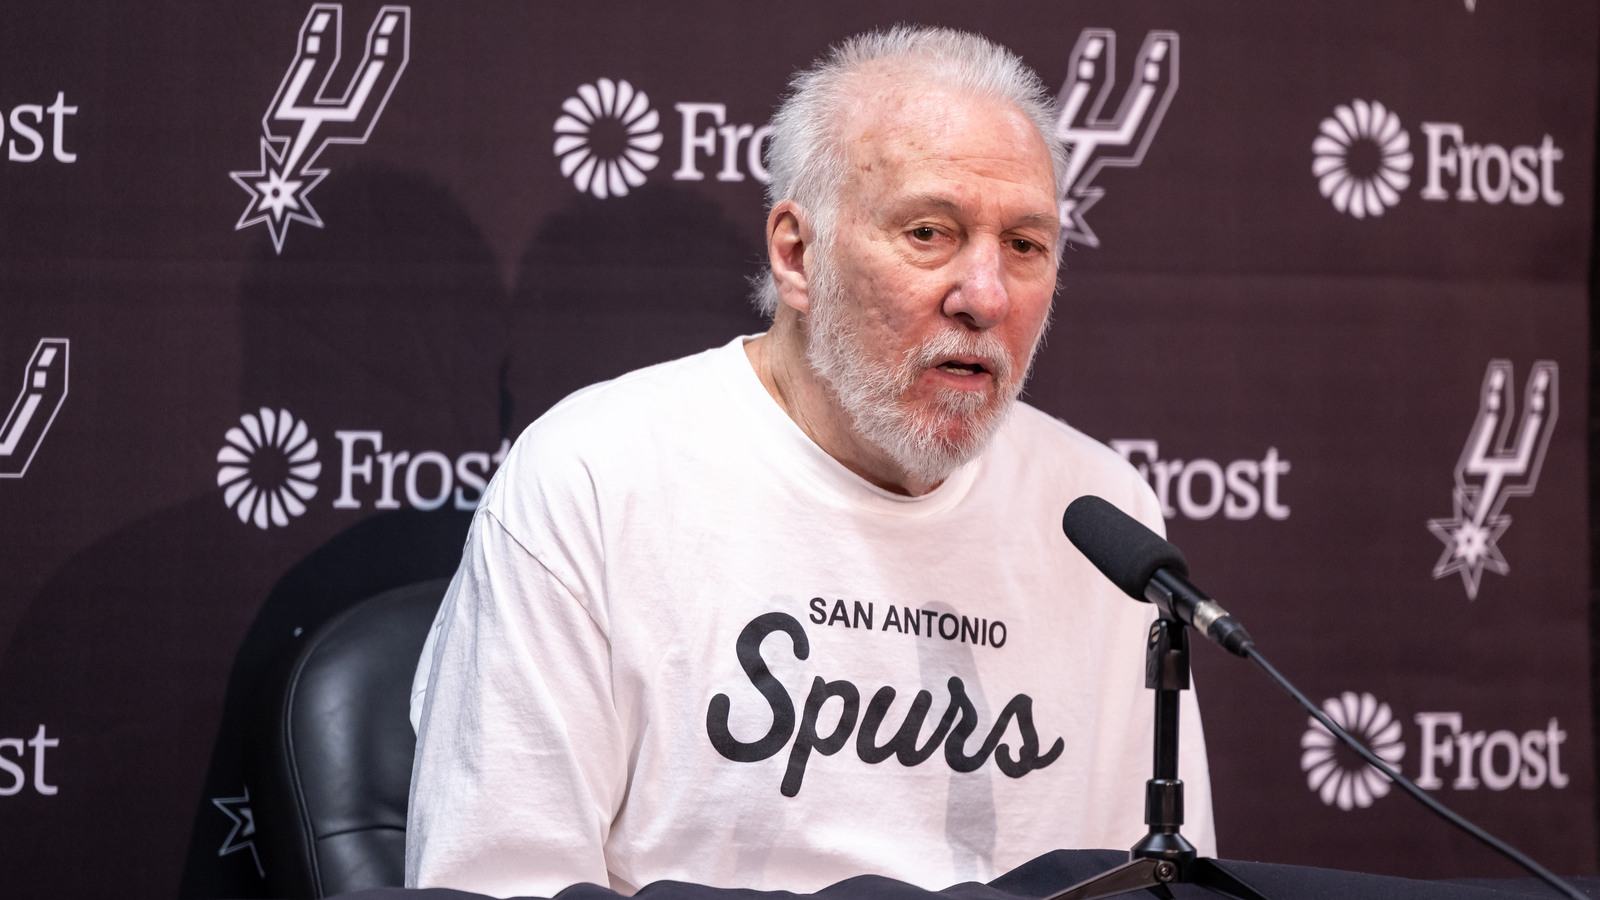 San Antonio Spurs’ Gregg Popovich Issues Powerful Statement Amid Support for Autism Awareness